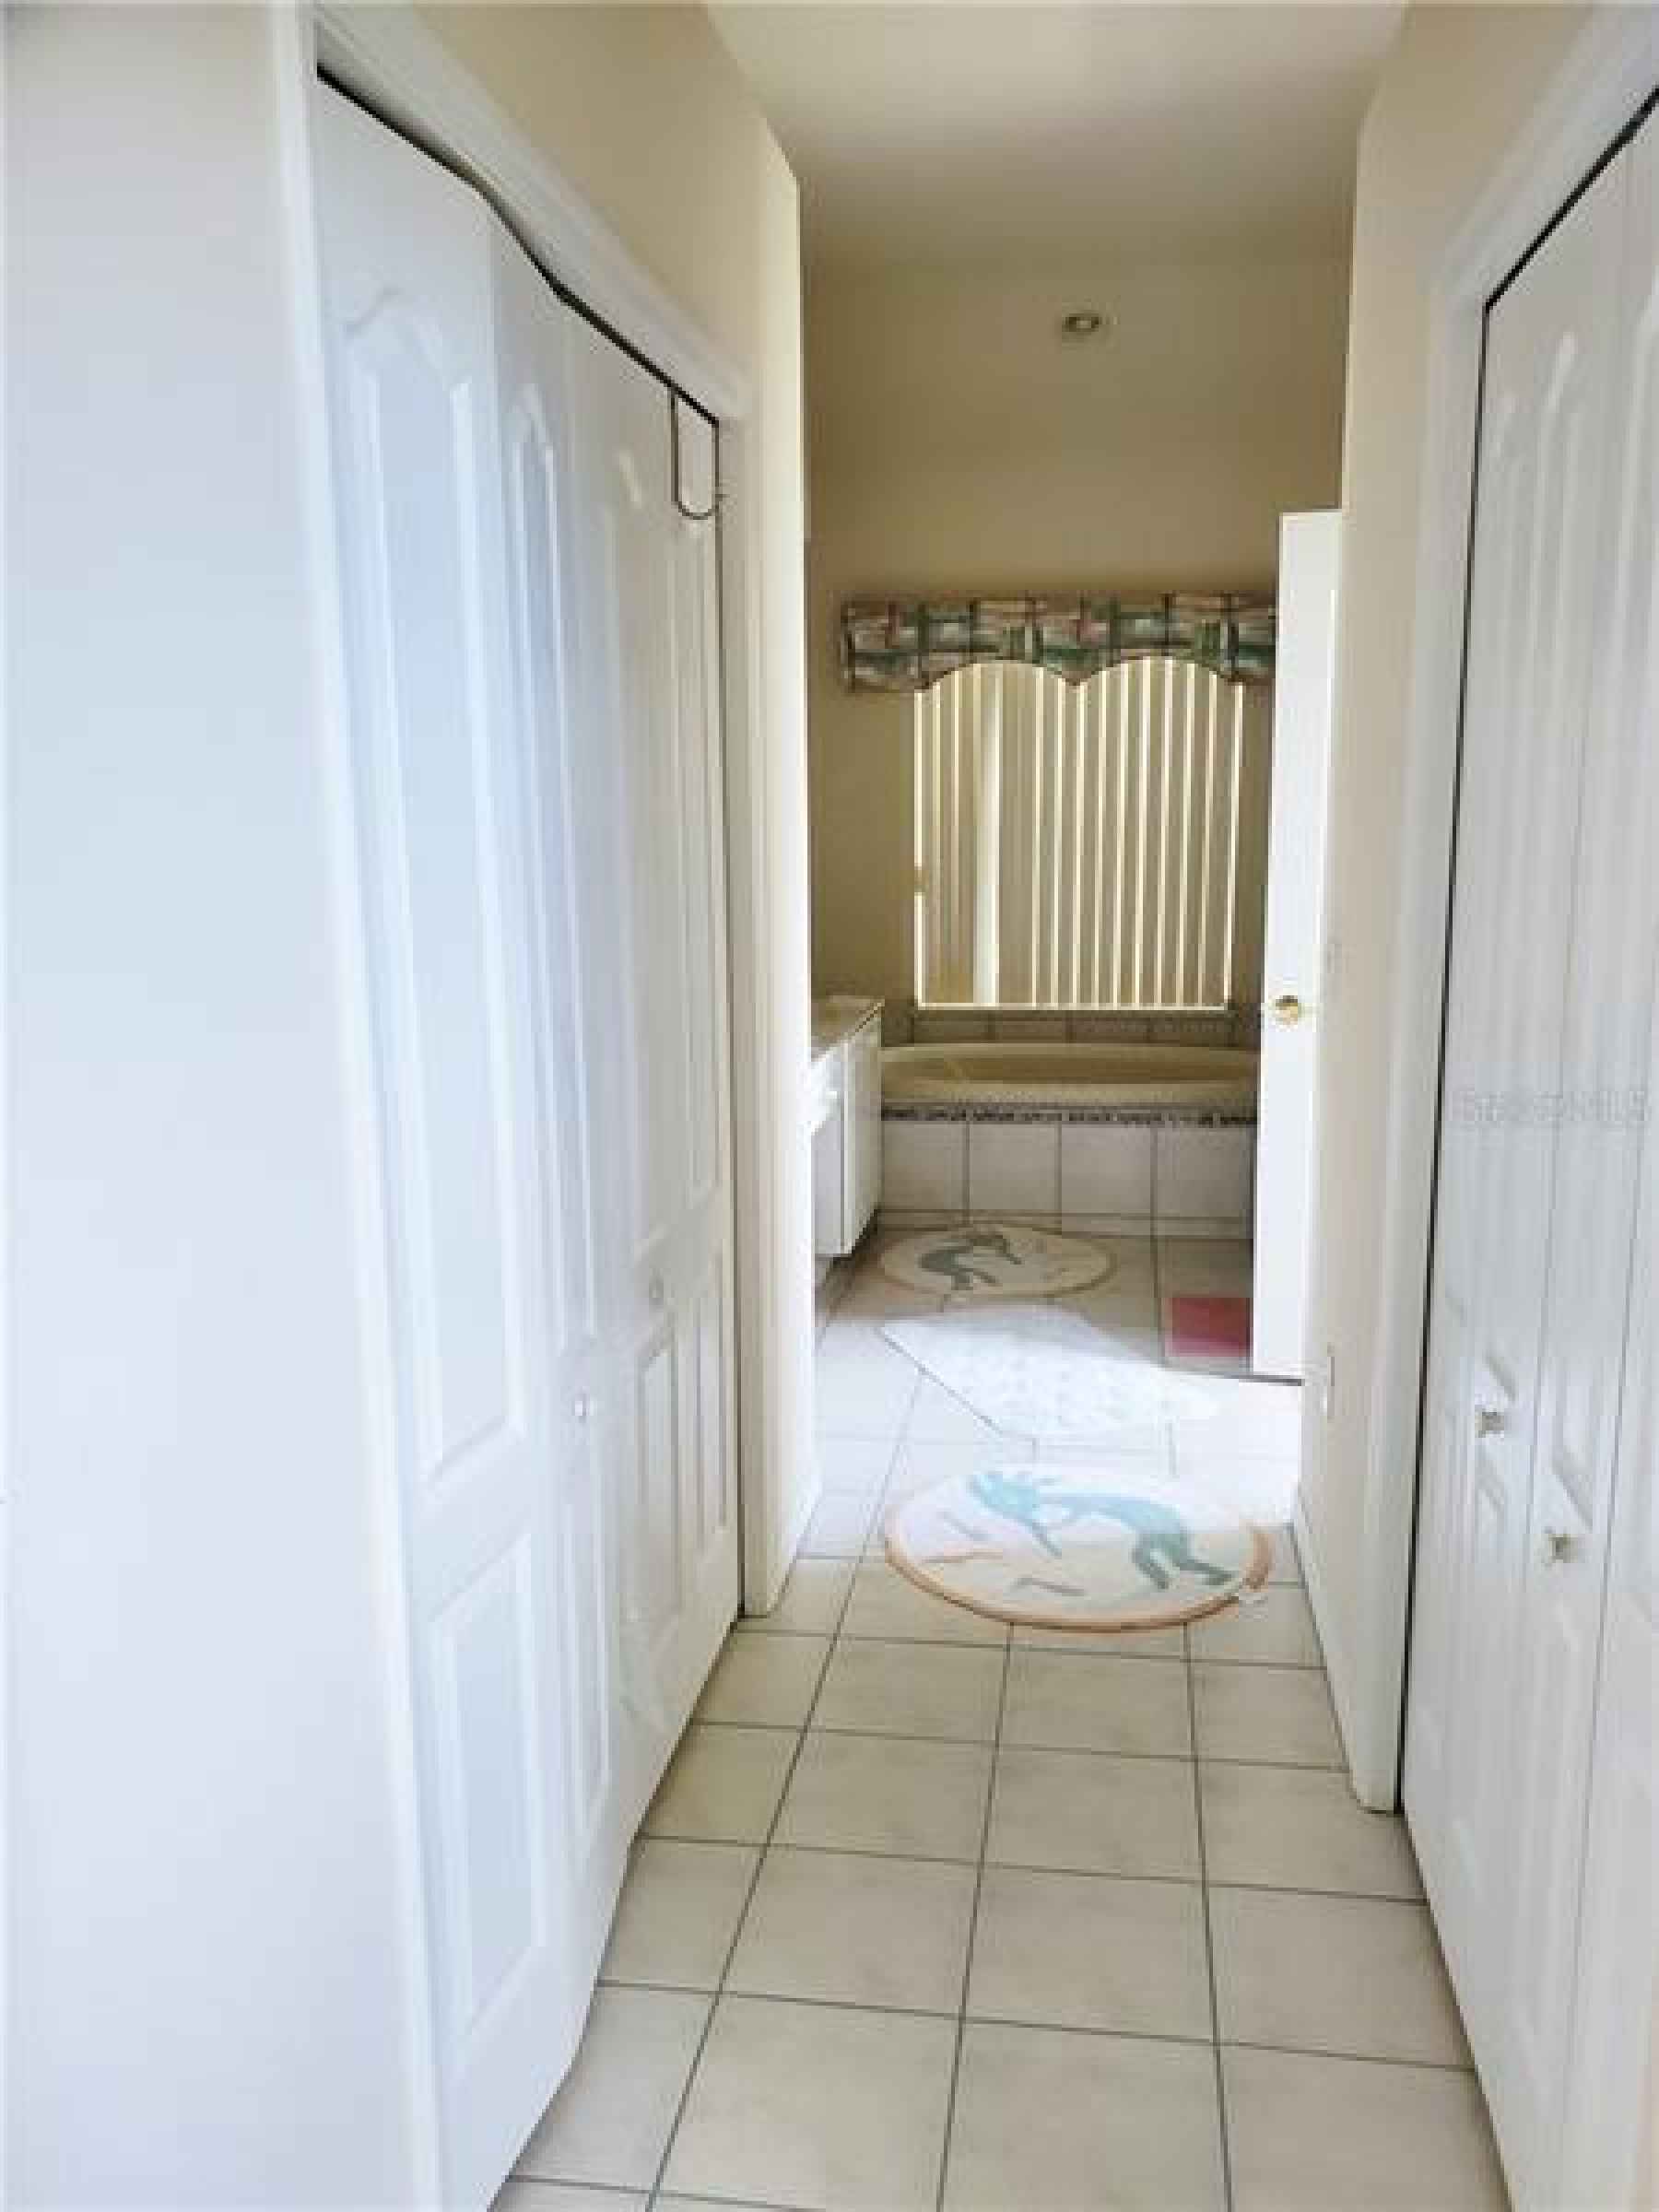 Hallway to Master Bath with His/her Closets